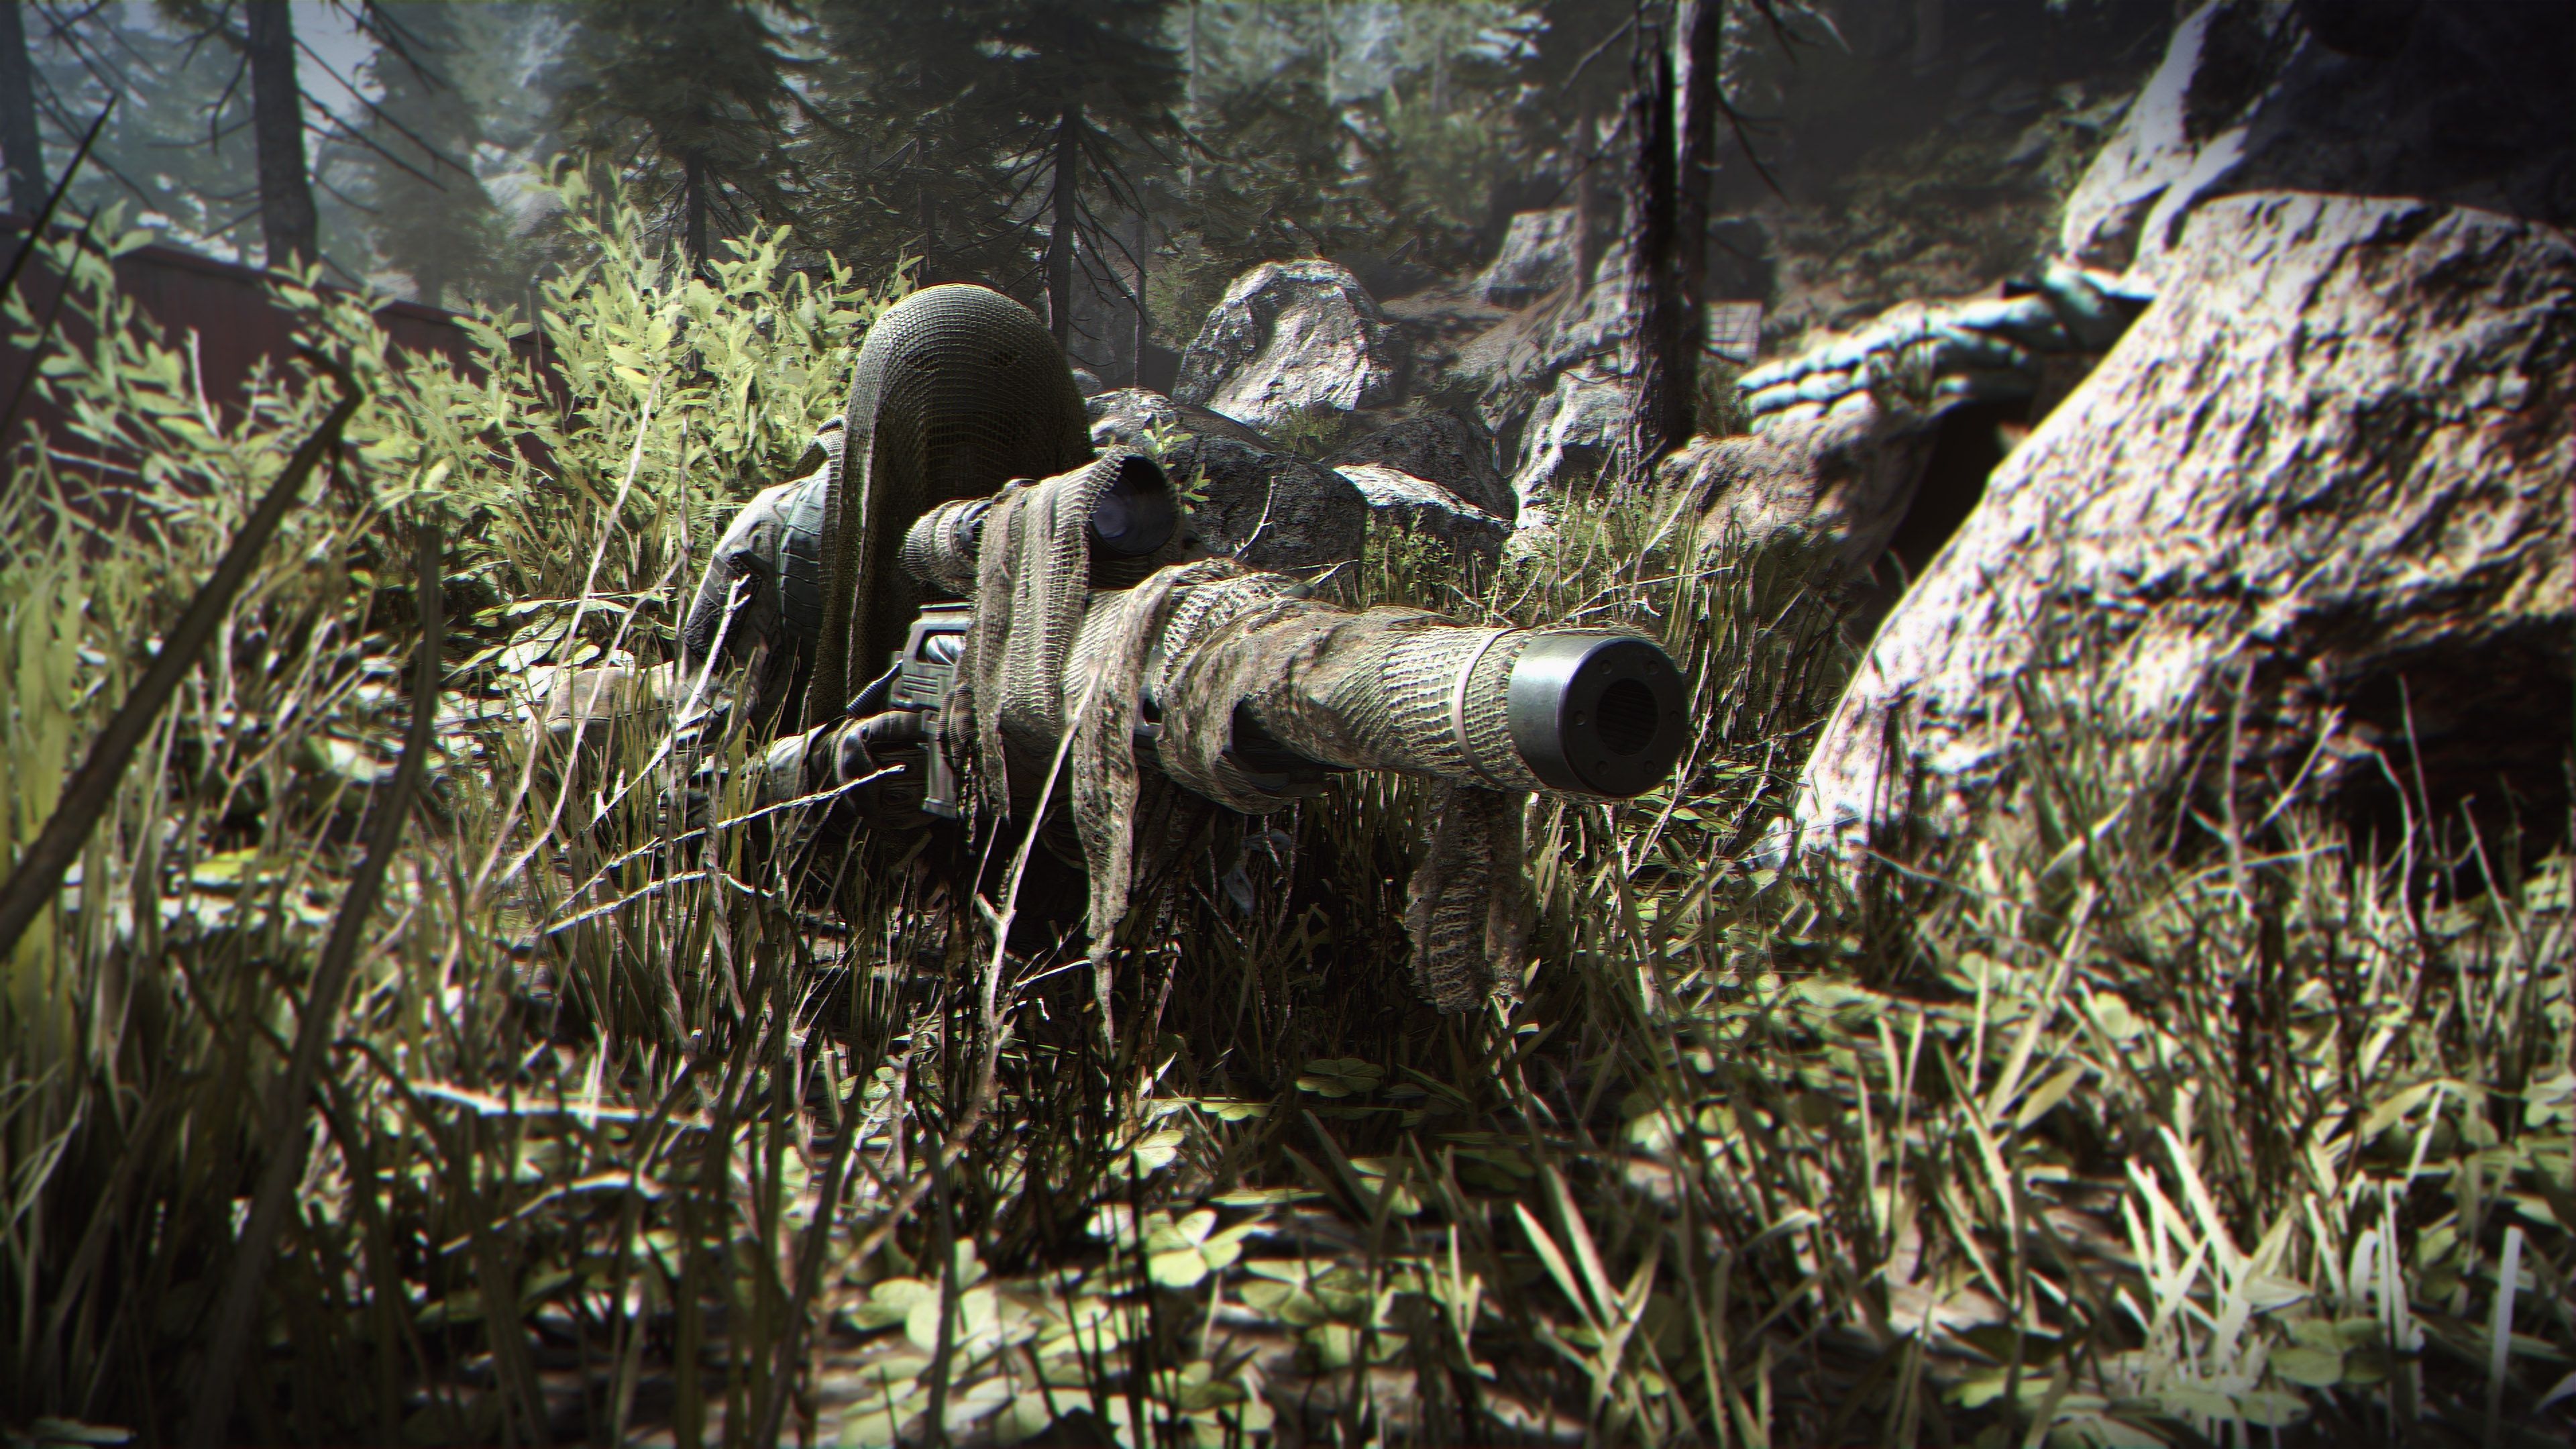 Call of Duty: Modern Warfare is about to get better with two new